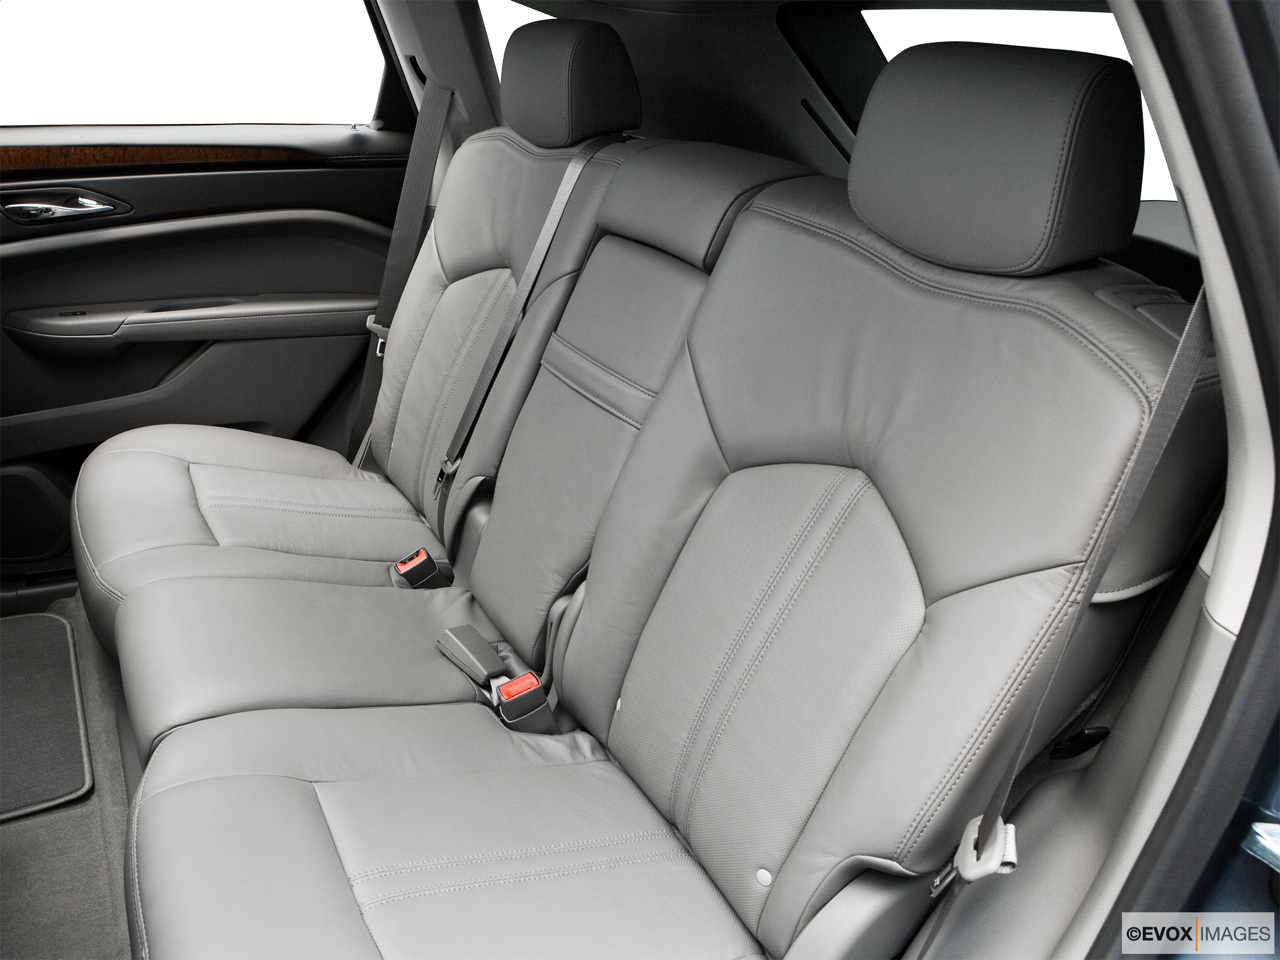 2010 Cadillac SRX Crossover Premium Collection Rear seats from Drivers Side. 